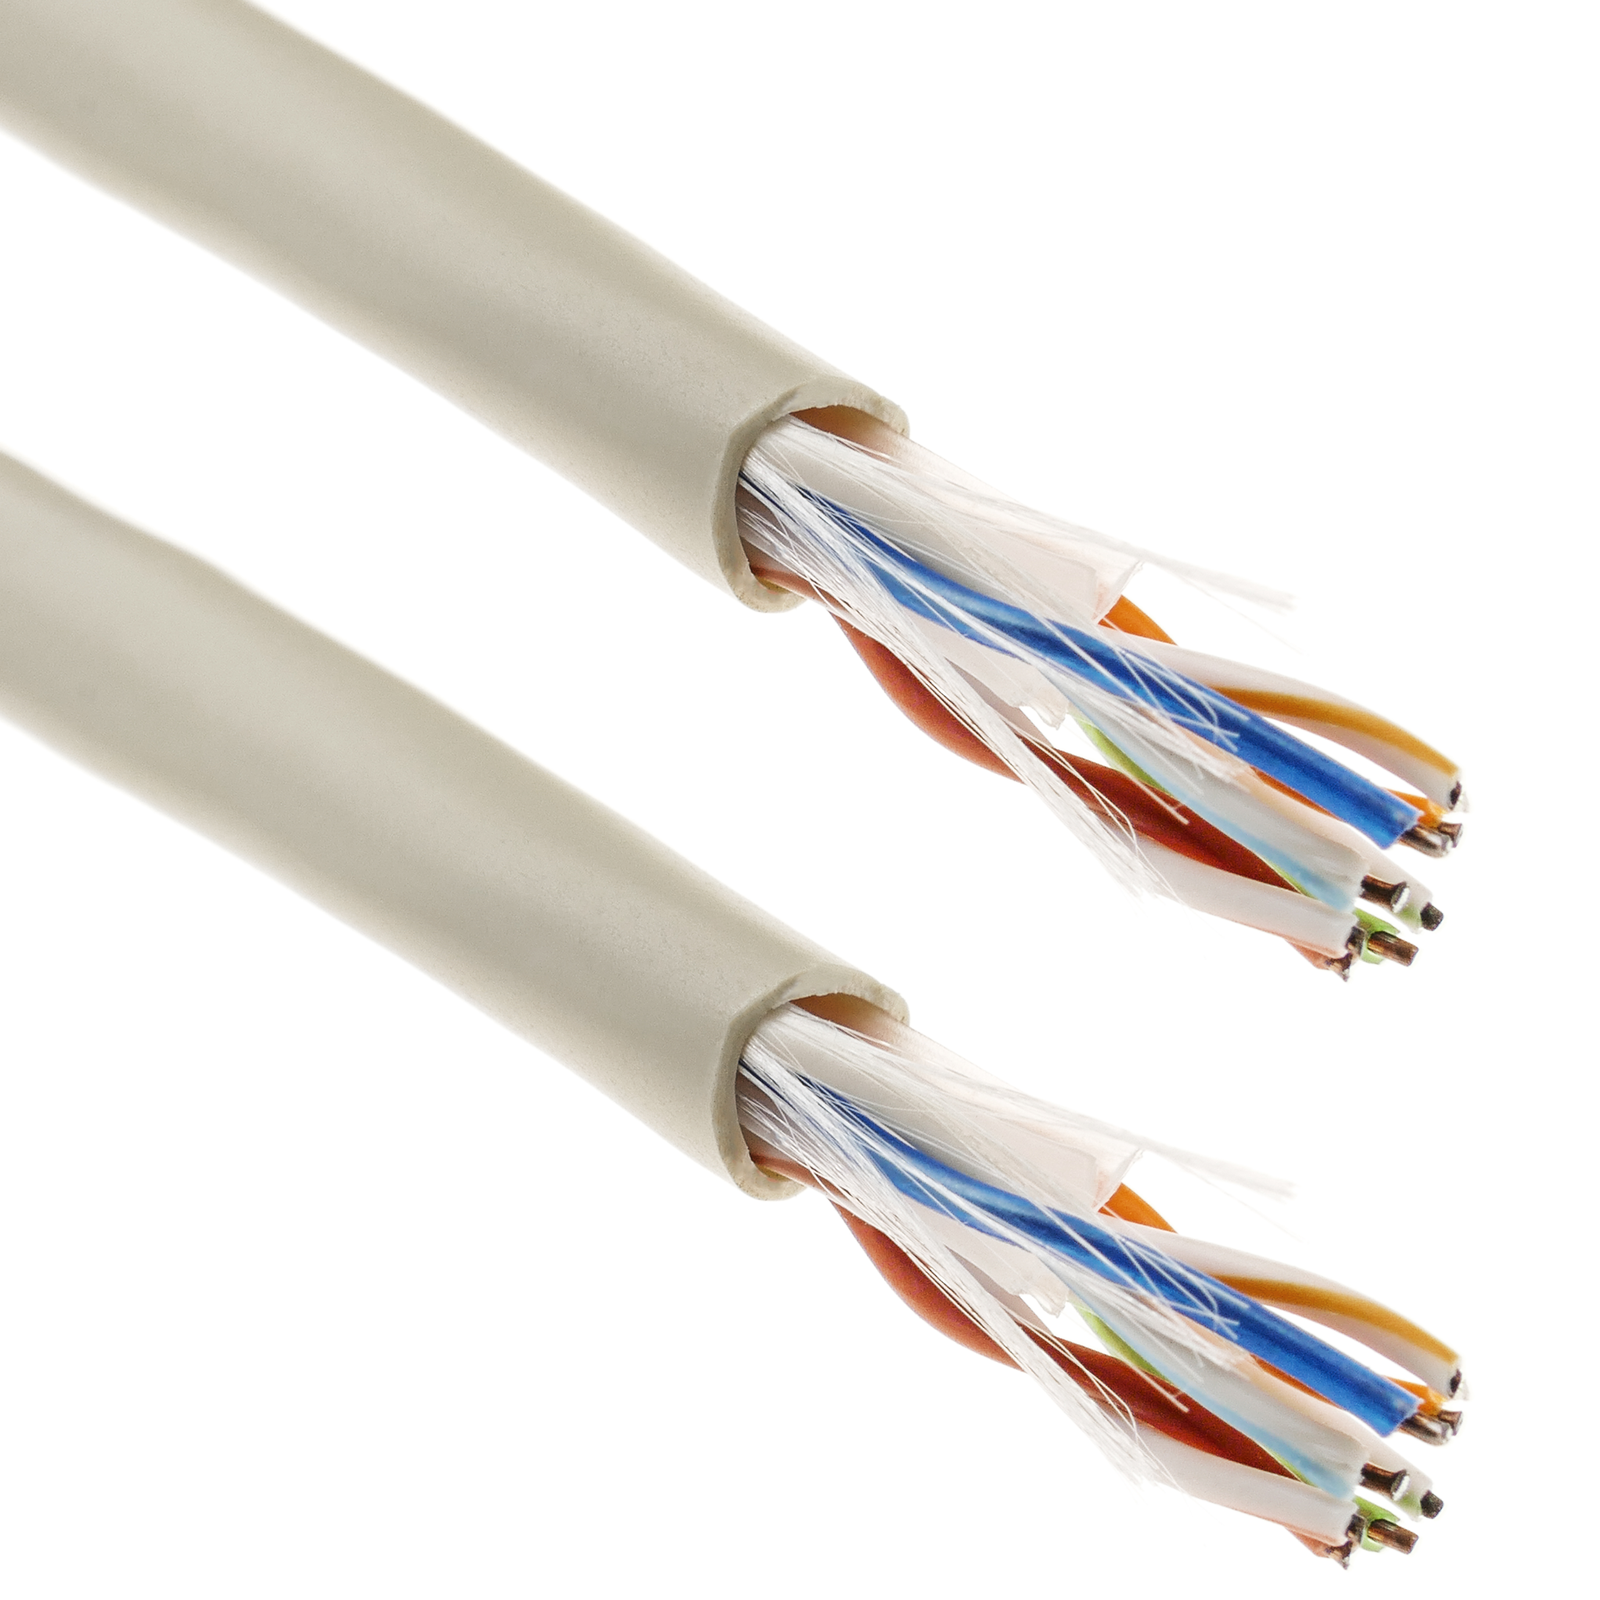 Cable Sourcing - 100 ft (30m) CAT5e Cable, Outdoor External Ethernet Cable,  100% Solid Copper, Network Cable, LAN, Router, WiFi 6, CCTV, 1000mb